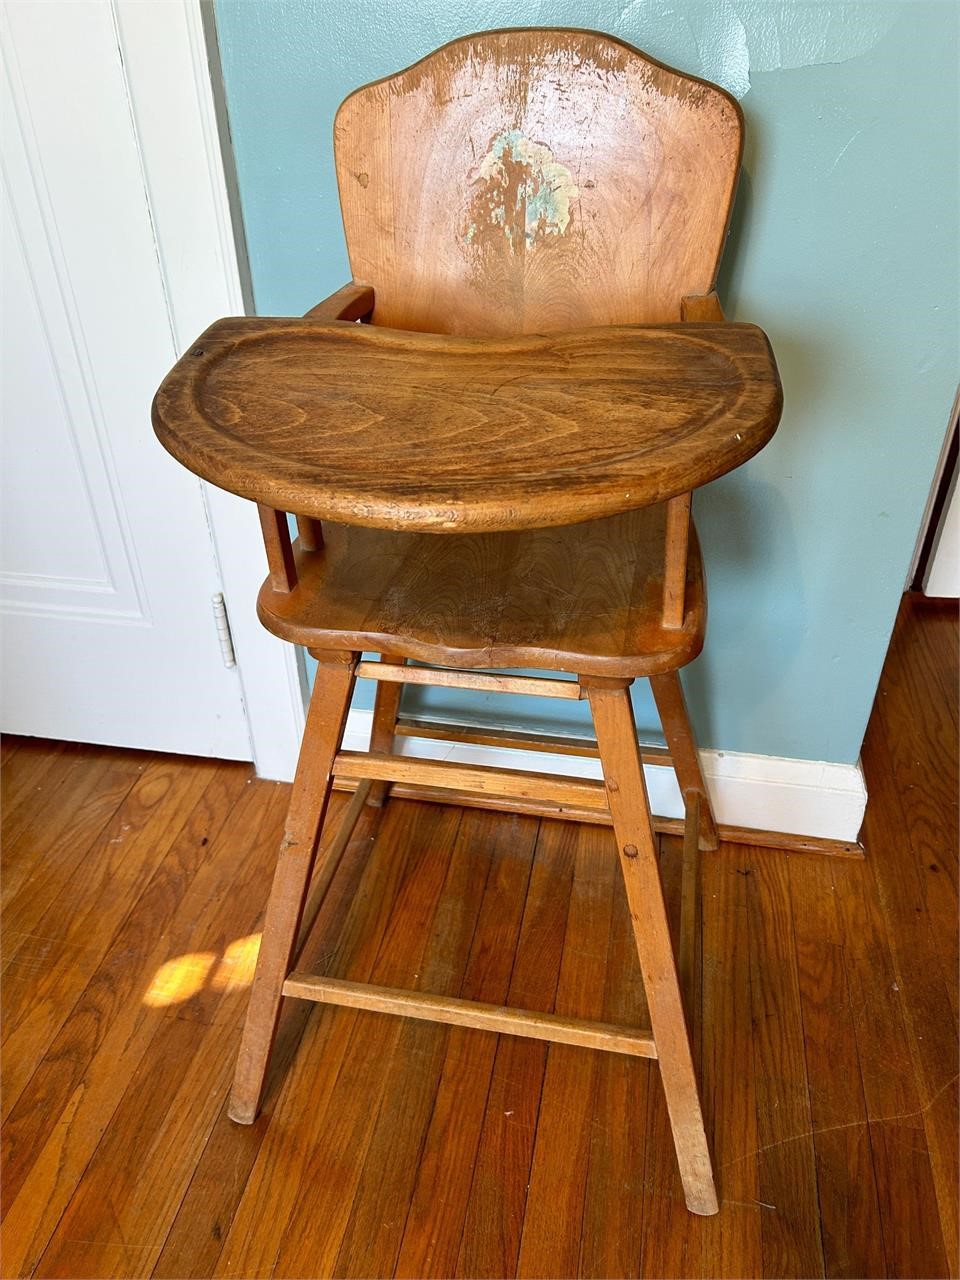 1950'S HIGHCHAIR - SOLID WOOD - DECAL IS FADED